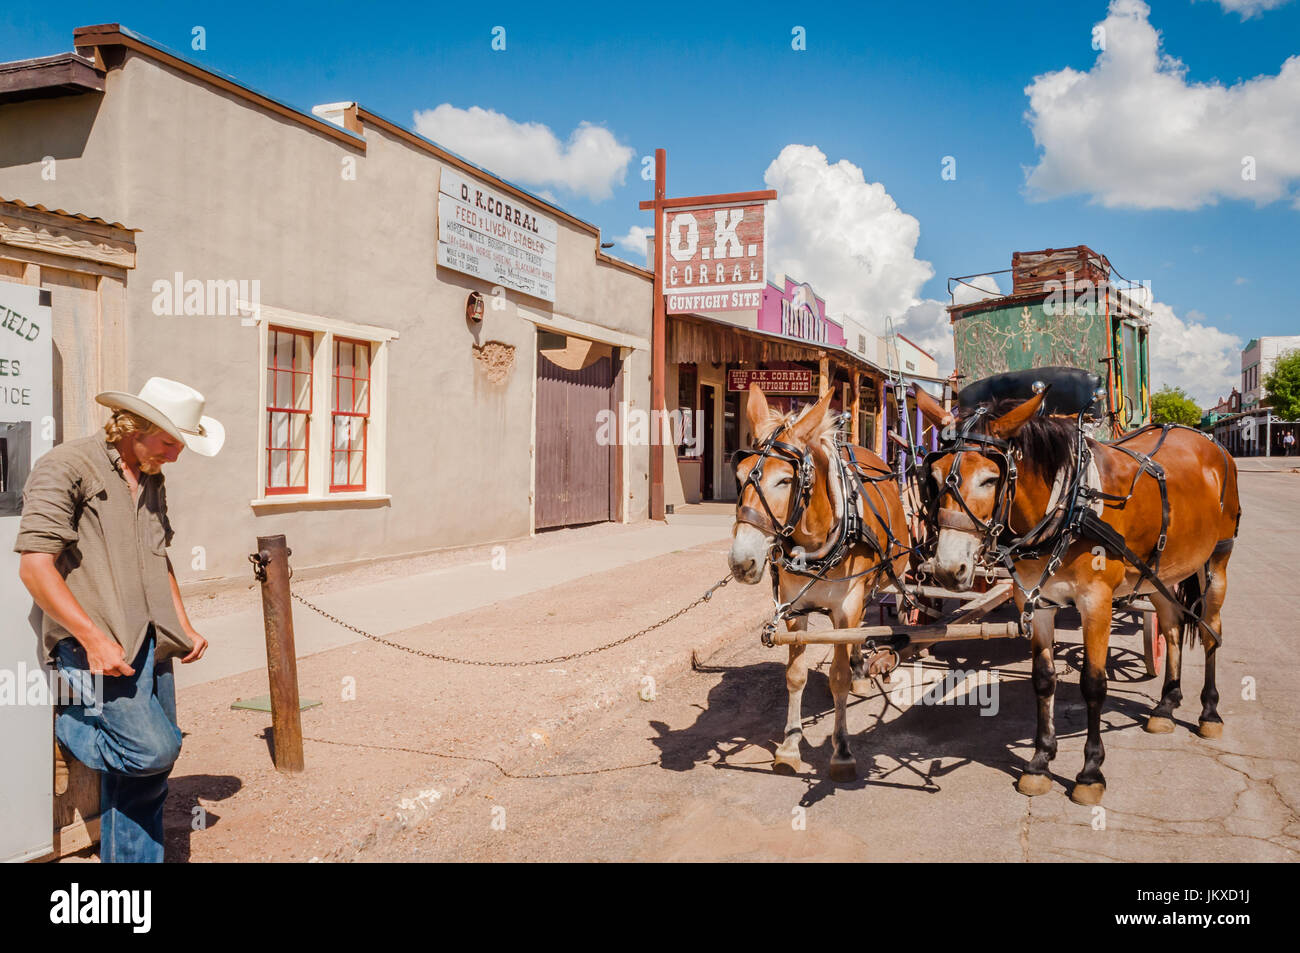 Mule-drawn stagecoach driver stands waiting for customers in Tombstone Arizona Stock Photo